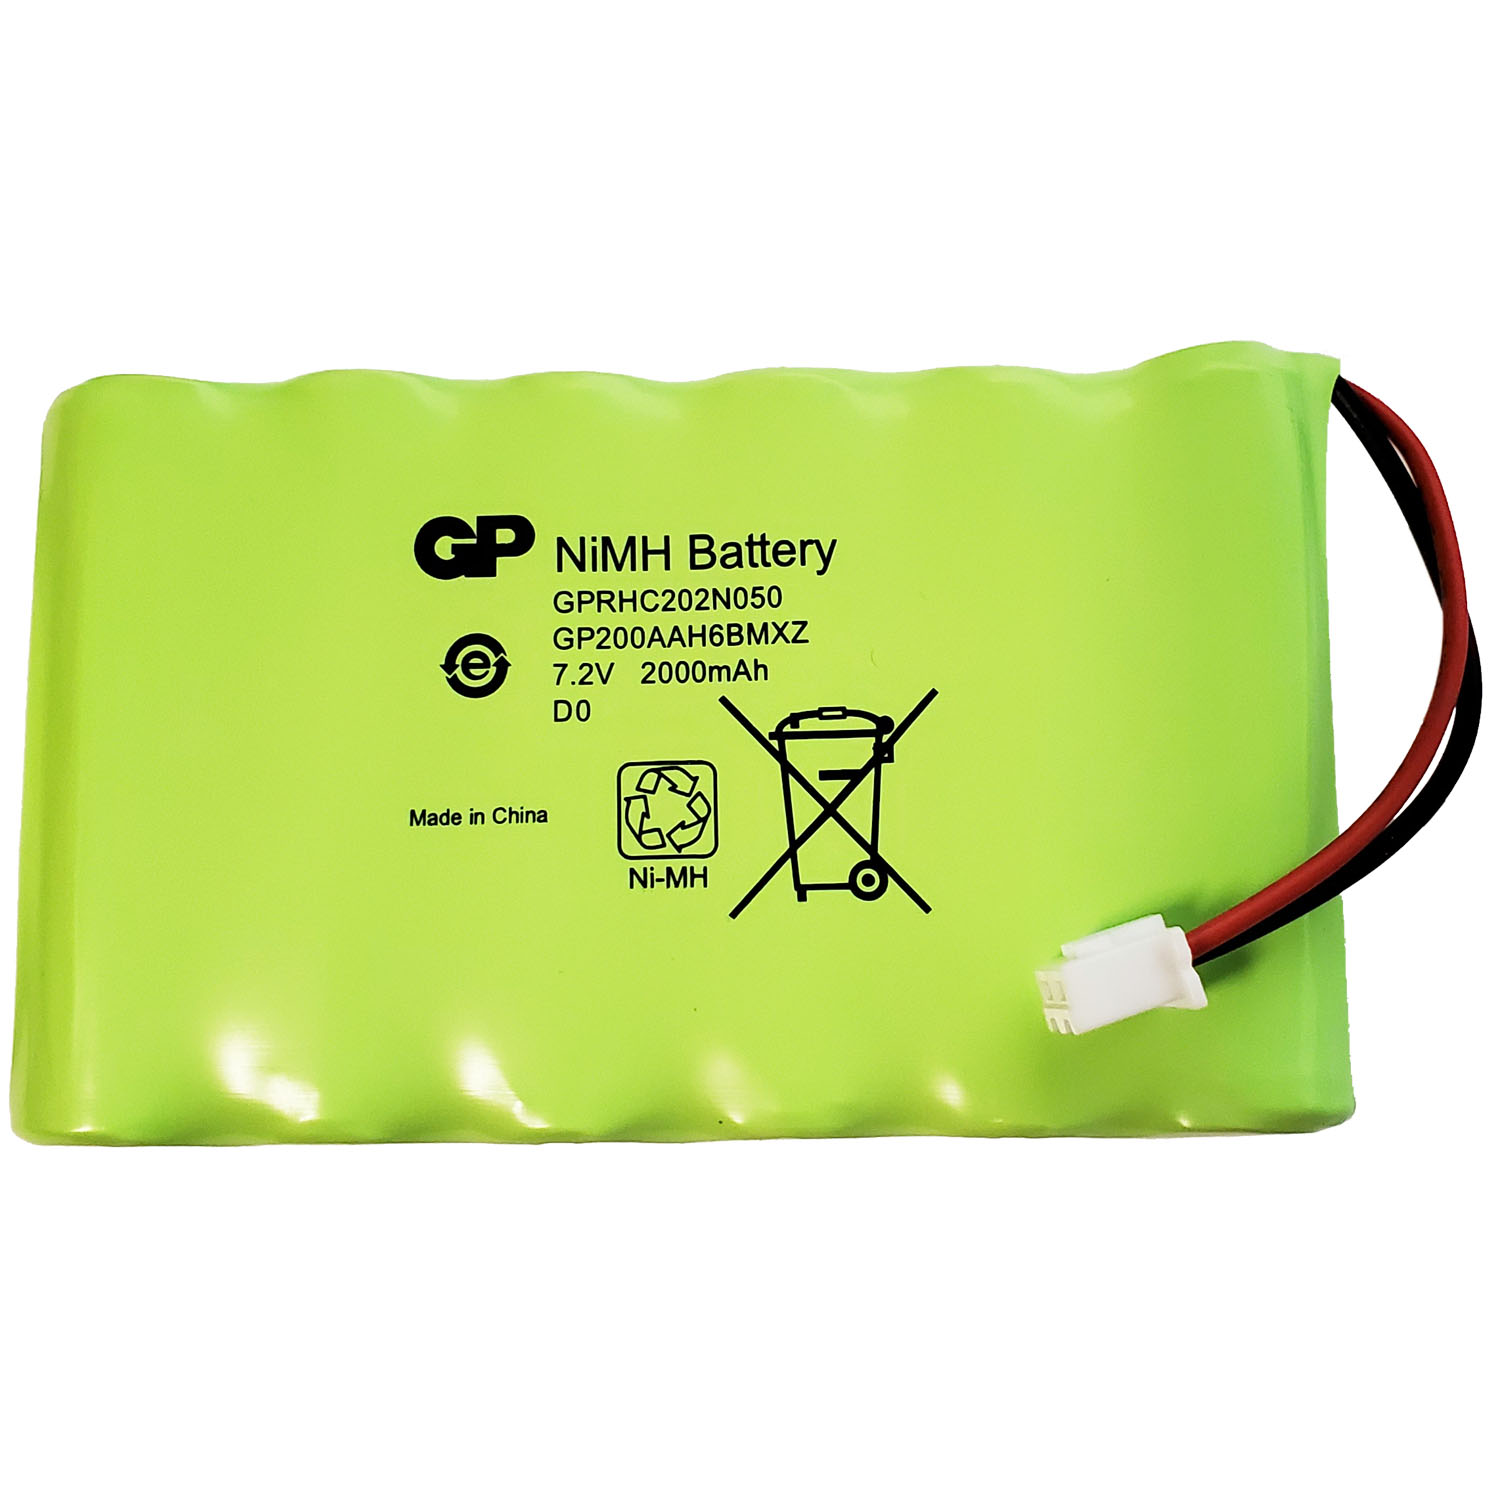 Cuddeback Replacement Parts Solar 7 2 Volt Nimh Battery Pack Model Pw 3686 Farmstead Outdoors